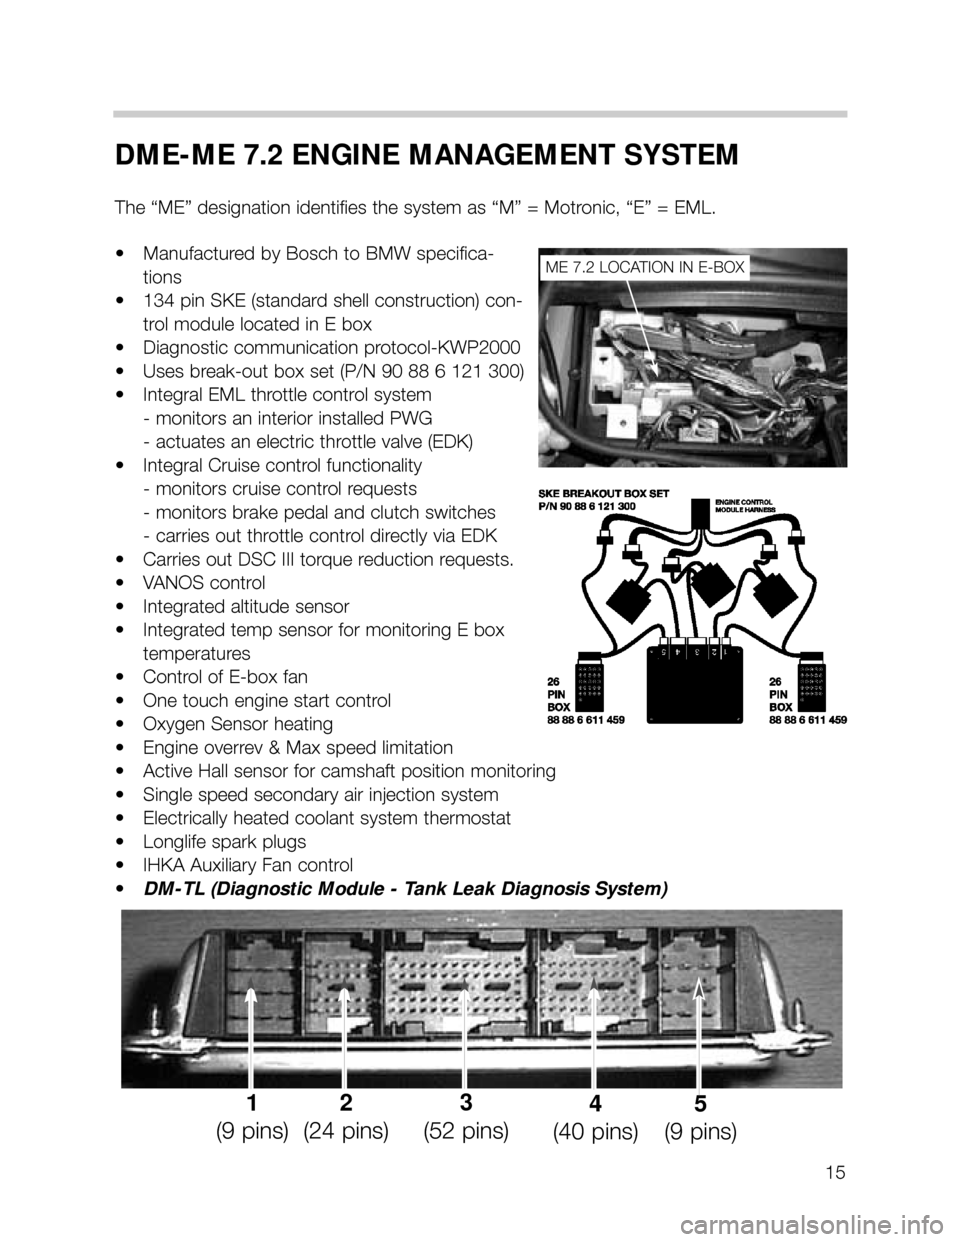 BMW 735i 1999 E38 M62TU Engine Workshop Manual 15
DME-ME 7.2 ENGINE MANAGEMENT SYSTEM
The “ME” designation identifies the system as “M” = Motronic, “E” = EML.
• Manufactured by Bosch to BMW specifica-
tions
• 134 pin SKE (standard 